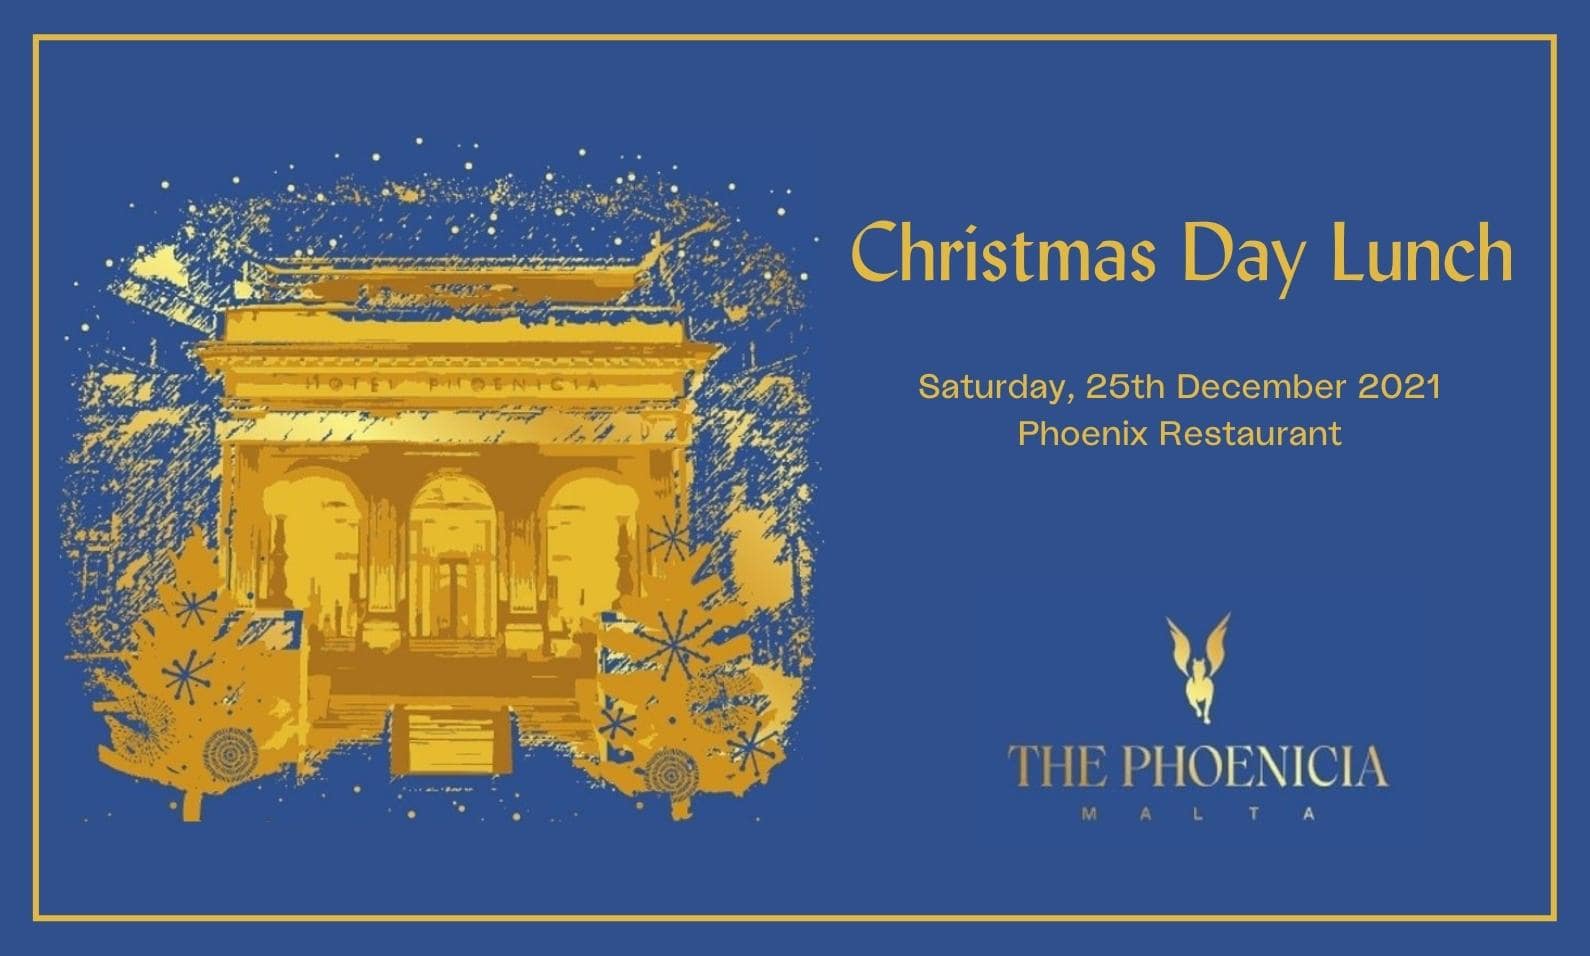 Christmas Day Lunch, The Phoenicia Malta